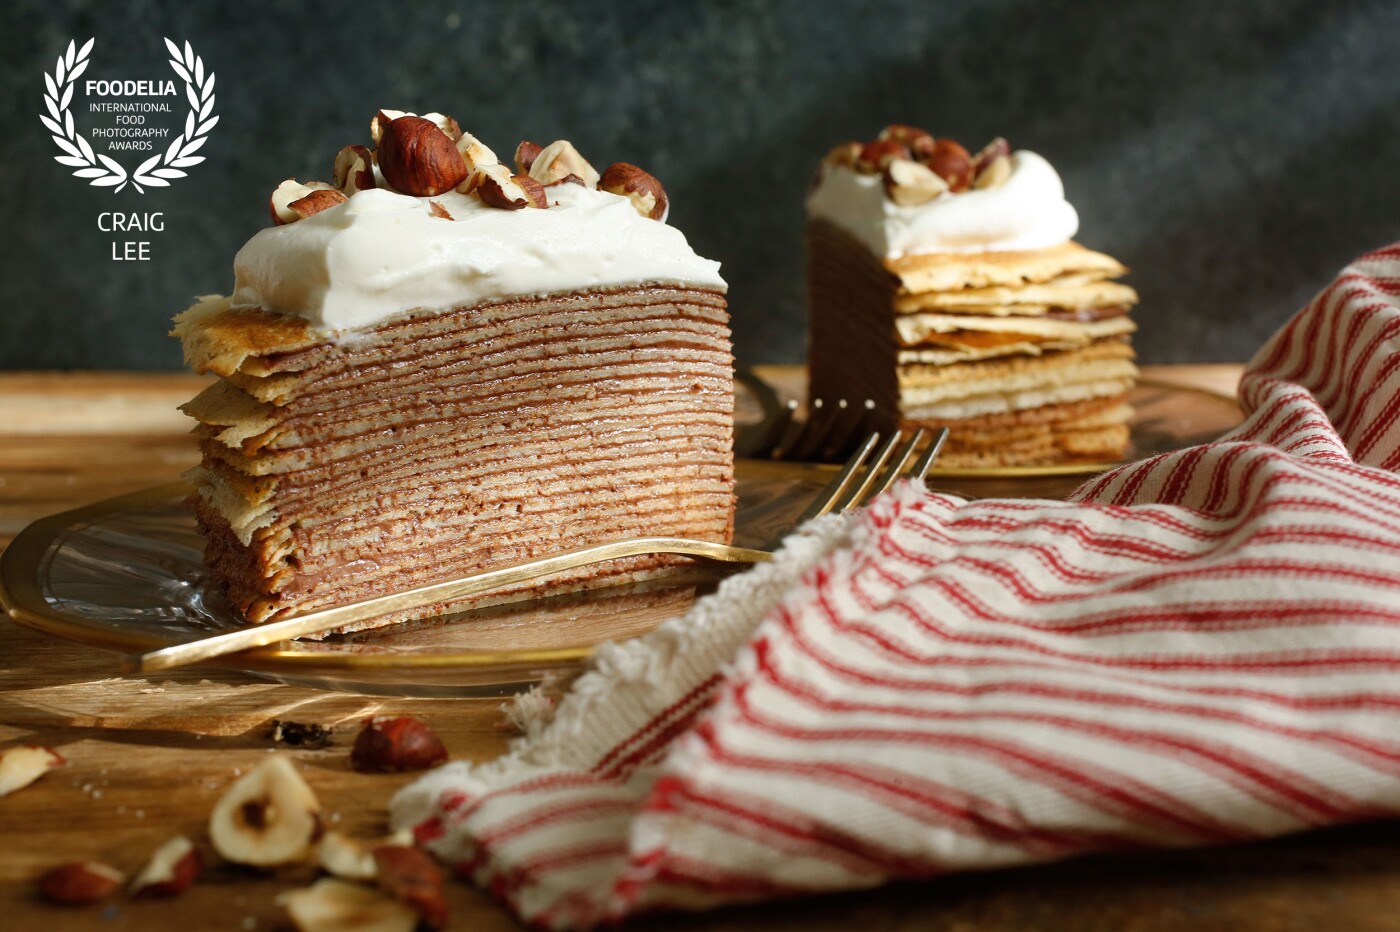 Chocolate Hazelnut Crepe Cake photographed for the New York Times @nytfood. This is a delicious cake made of hazelnut crepes stacked with chocolate cream between each layer, topped with whipped cream, hazelnuts and dust with cocoa. Styled by @the_bojon_gourmet and @snixykitchen.